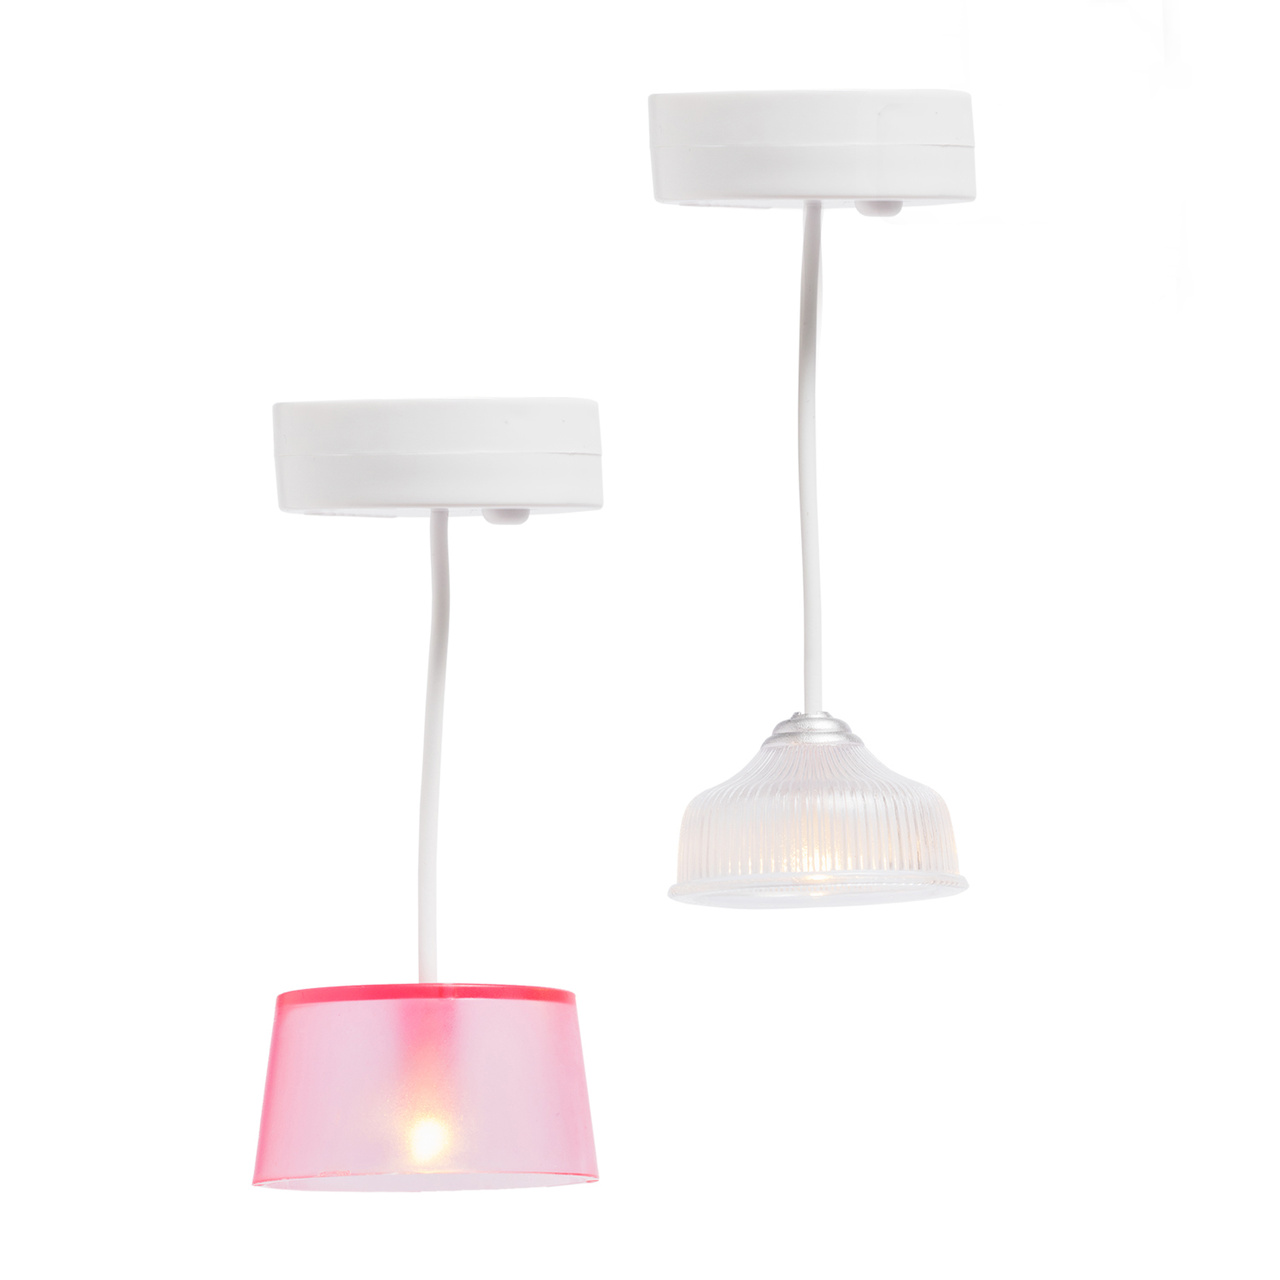 Doll house lighting lundby doll house lighting 2 ceiling lamps